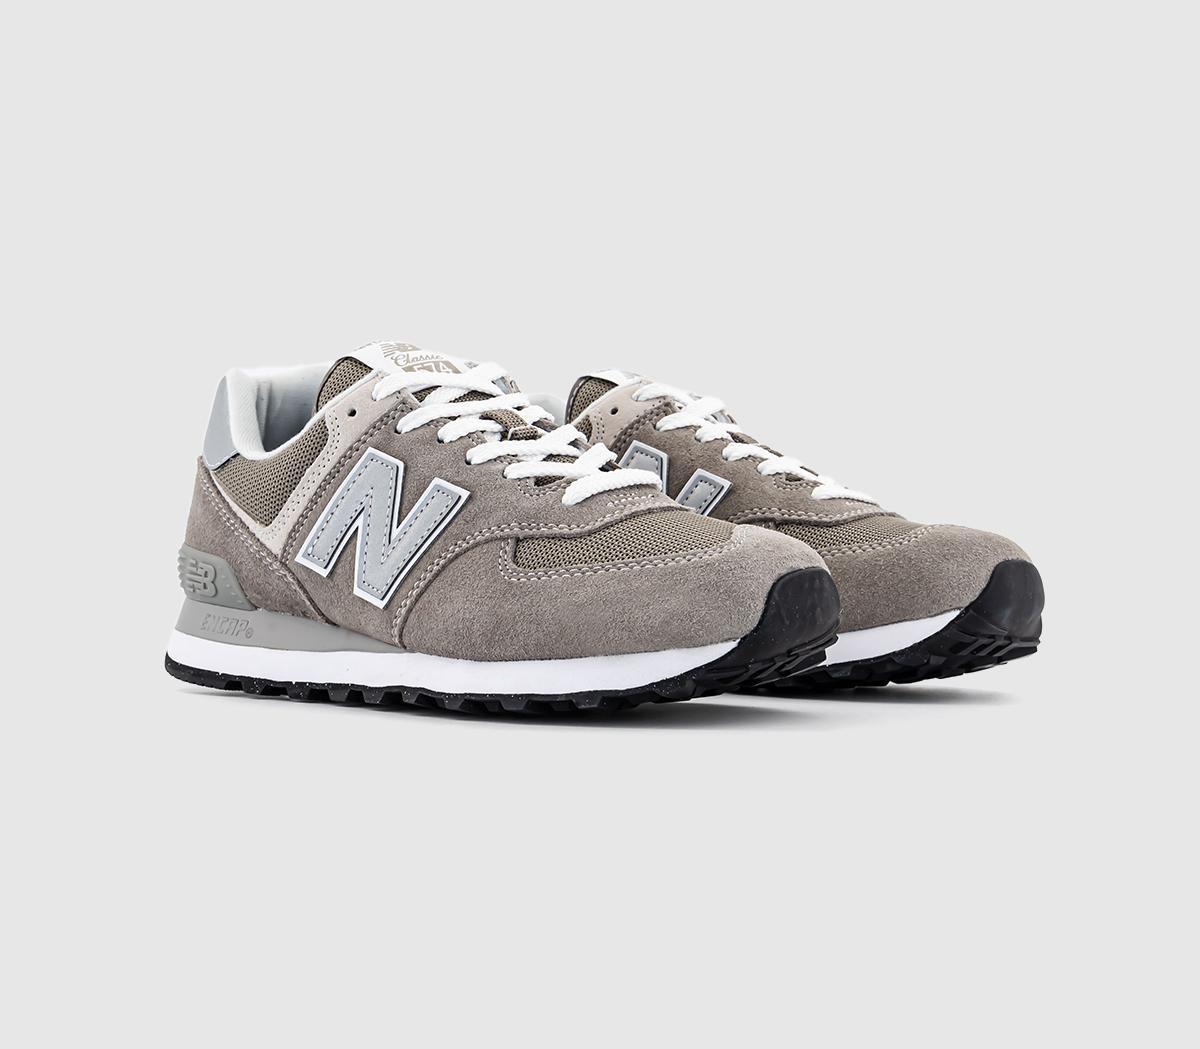 New Balance Mens 574 Trainers Grey White Green Leaf Rubber, 6